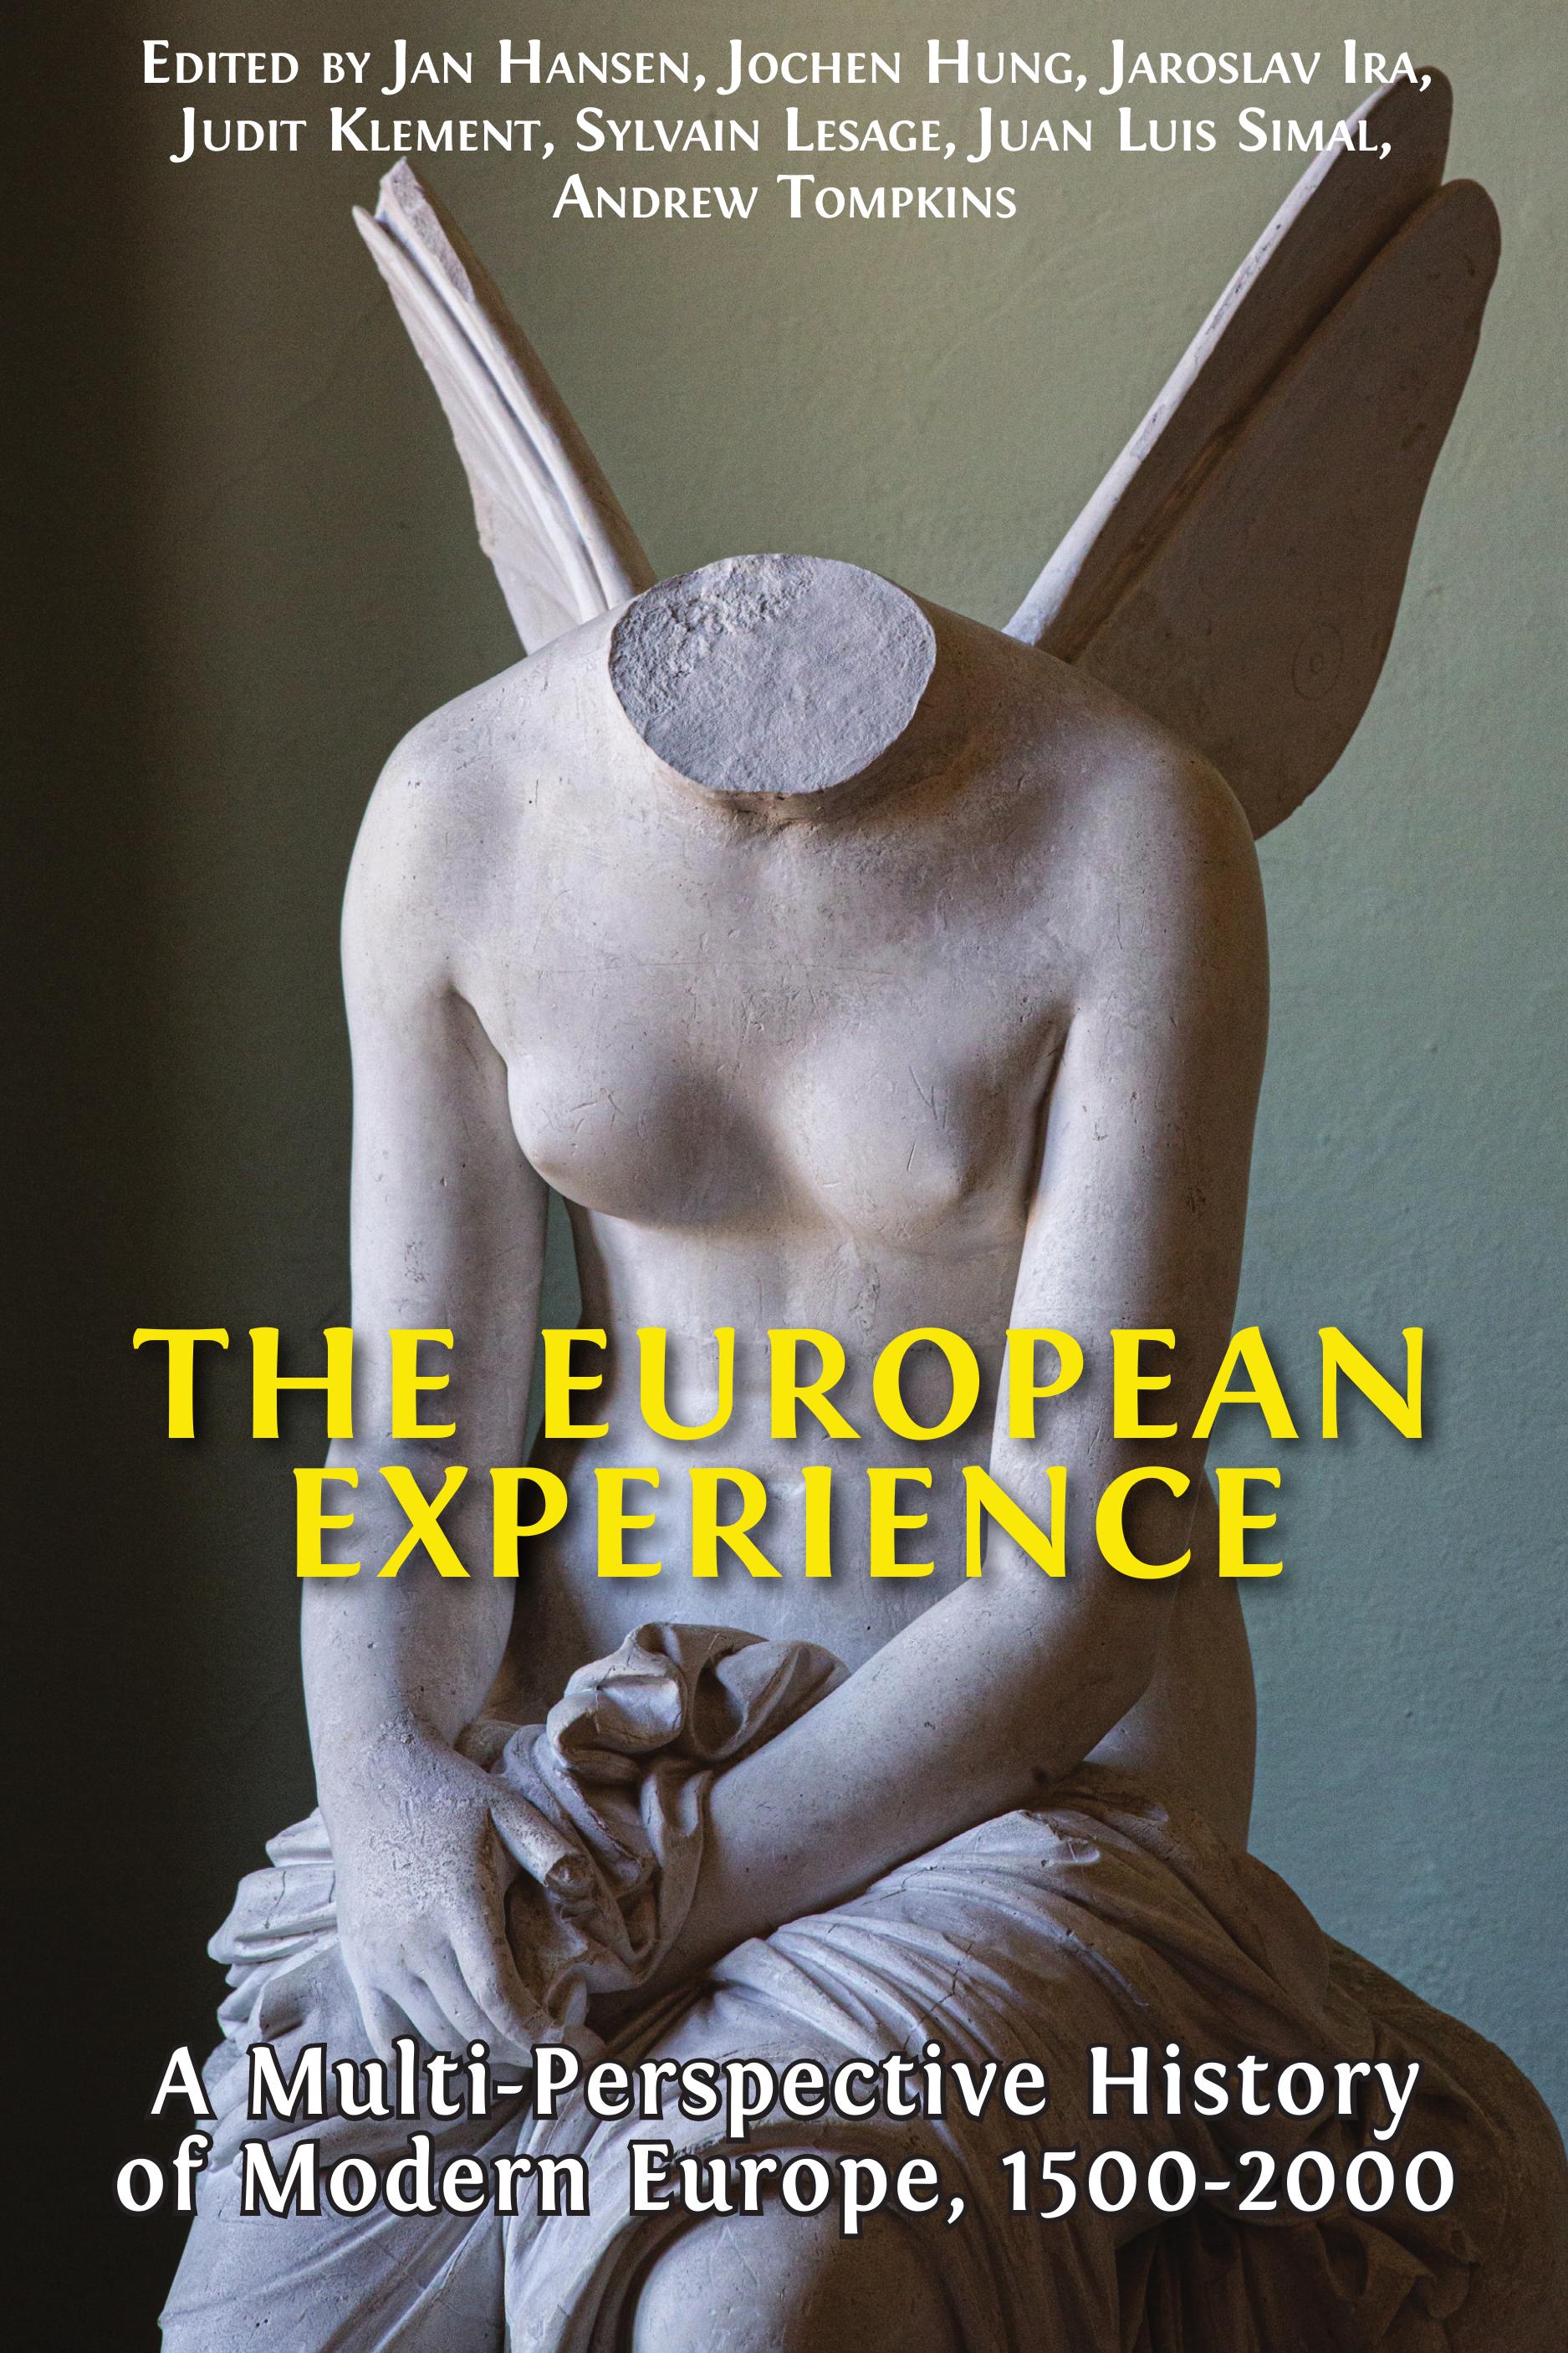 Read more about The European Experience: A Multi-Perspective History of Modern Europe, 1500–2000